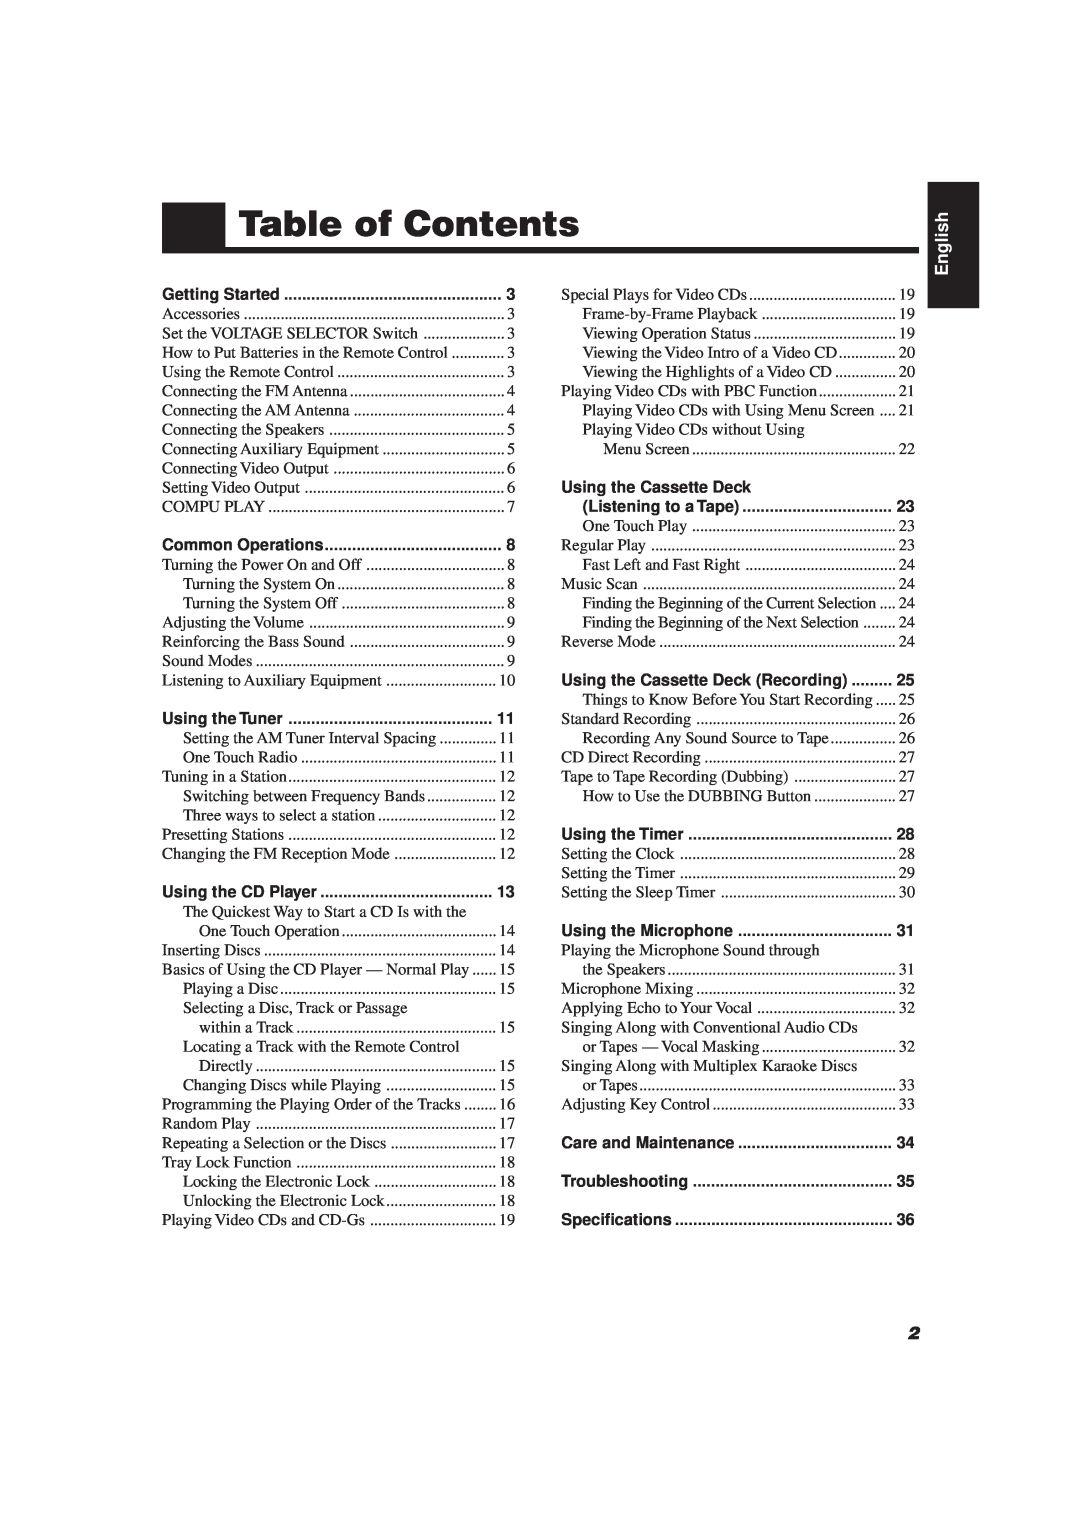 JVC MX-J111V manual Table of Contents, Using the Cassette Deck, English 